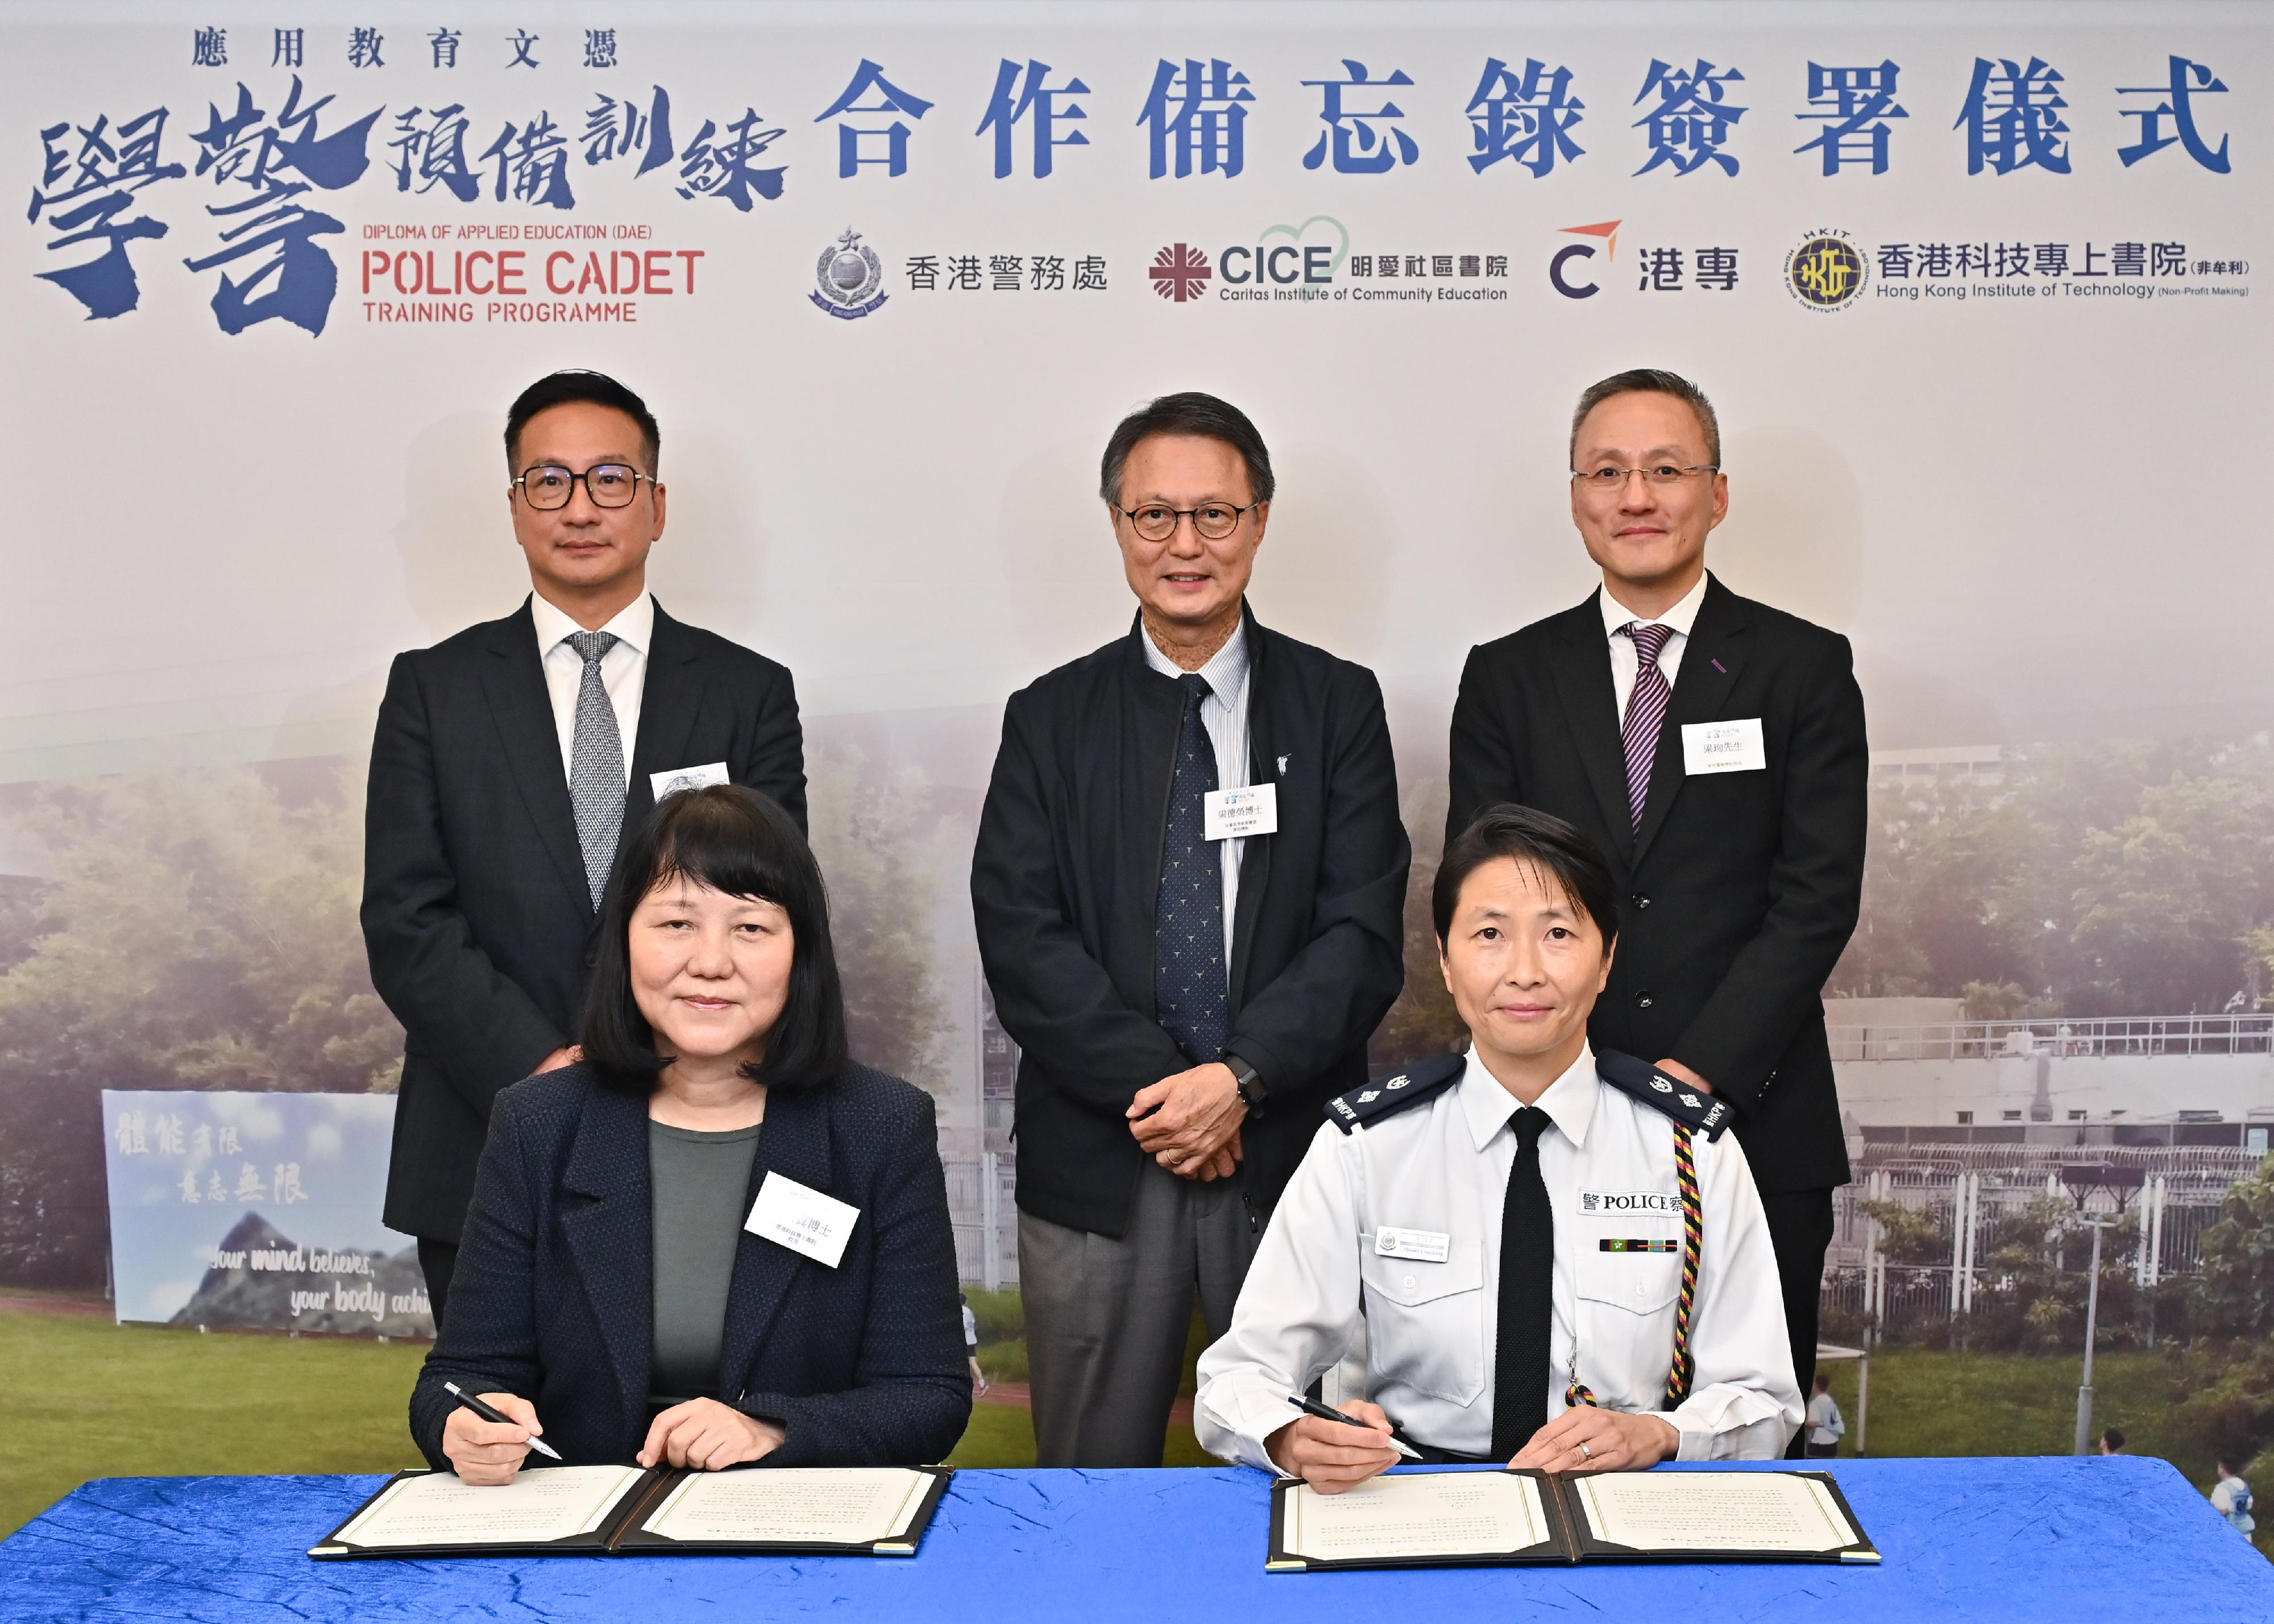 The Hong Kong Police College announced today (January 19) that it will co-organise the “Diploma of Applied Education - Police Cadet Training” Programme with Caritas Institute of Community Education, Hong Kong College of Technology and Hong Kong Institute of Technology (HKIT) in the 2024/25 academic year. Witnessed by the Assistant Commissioner of Police (Personnel), Mr Chan Man-tak (back row, first left); Acting Director of the Hong Kong Police College, Mr Leung Shun (back row, first right), and Programme Director of Diploma of Applied Education of the Federation for Self-financing Tertiary Education, Dr Simon Leung (back row, centre), the Senior Superintendent of Police, School of Foundation Training, Ms Tsang Chiu-tong (front row, right), signed the Memorandum of Understanding with the President of HKIT, Dr Shi Mei-chun (front row, left).